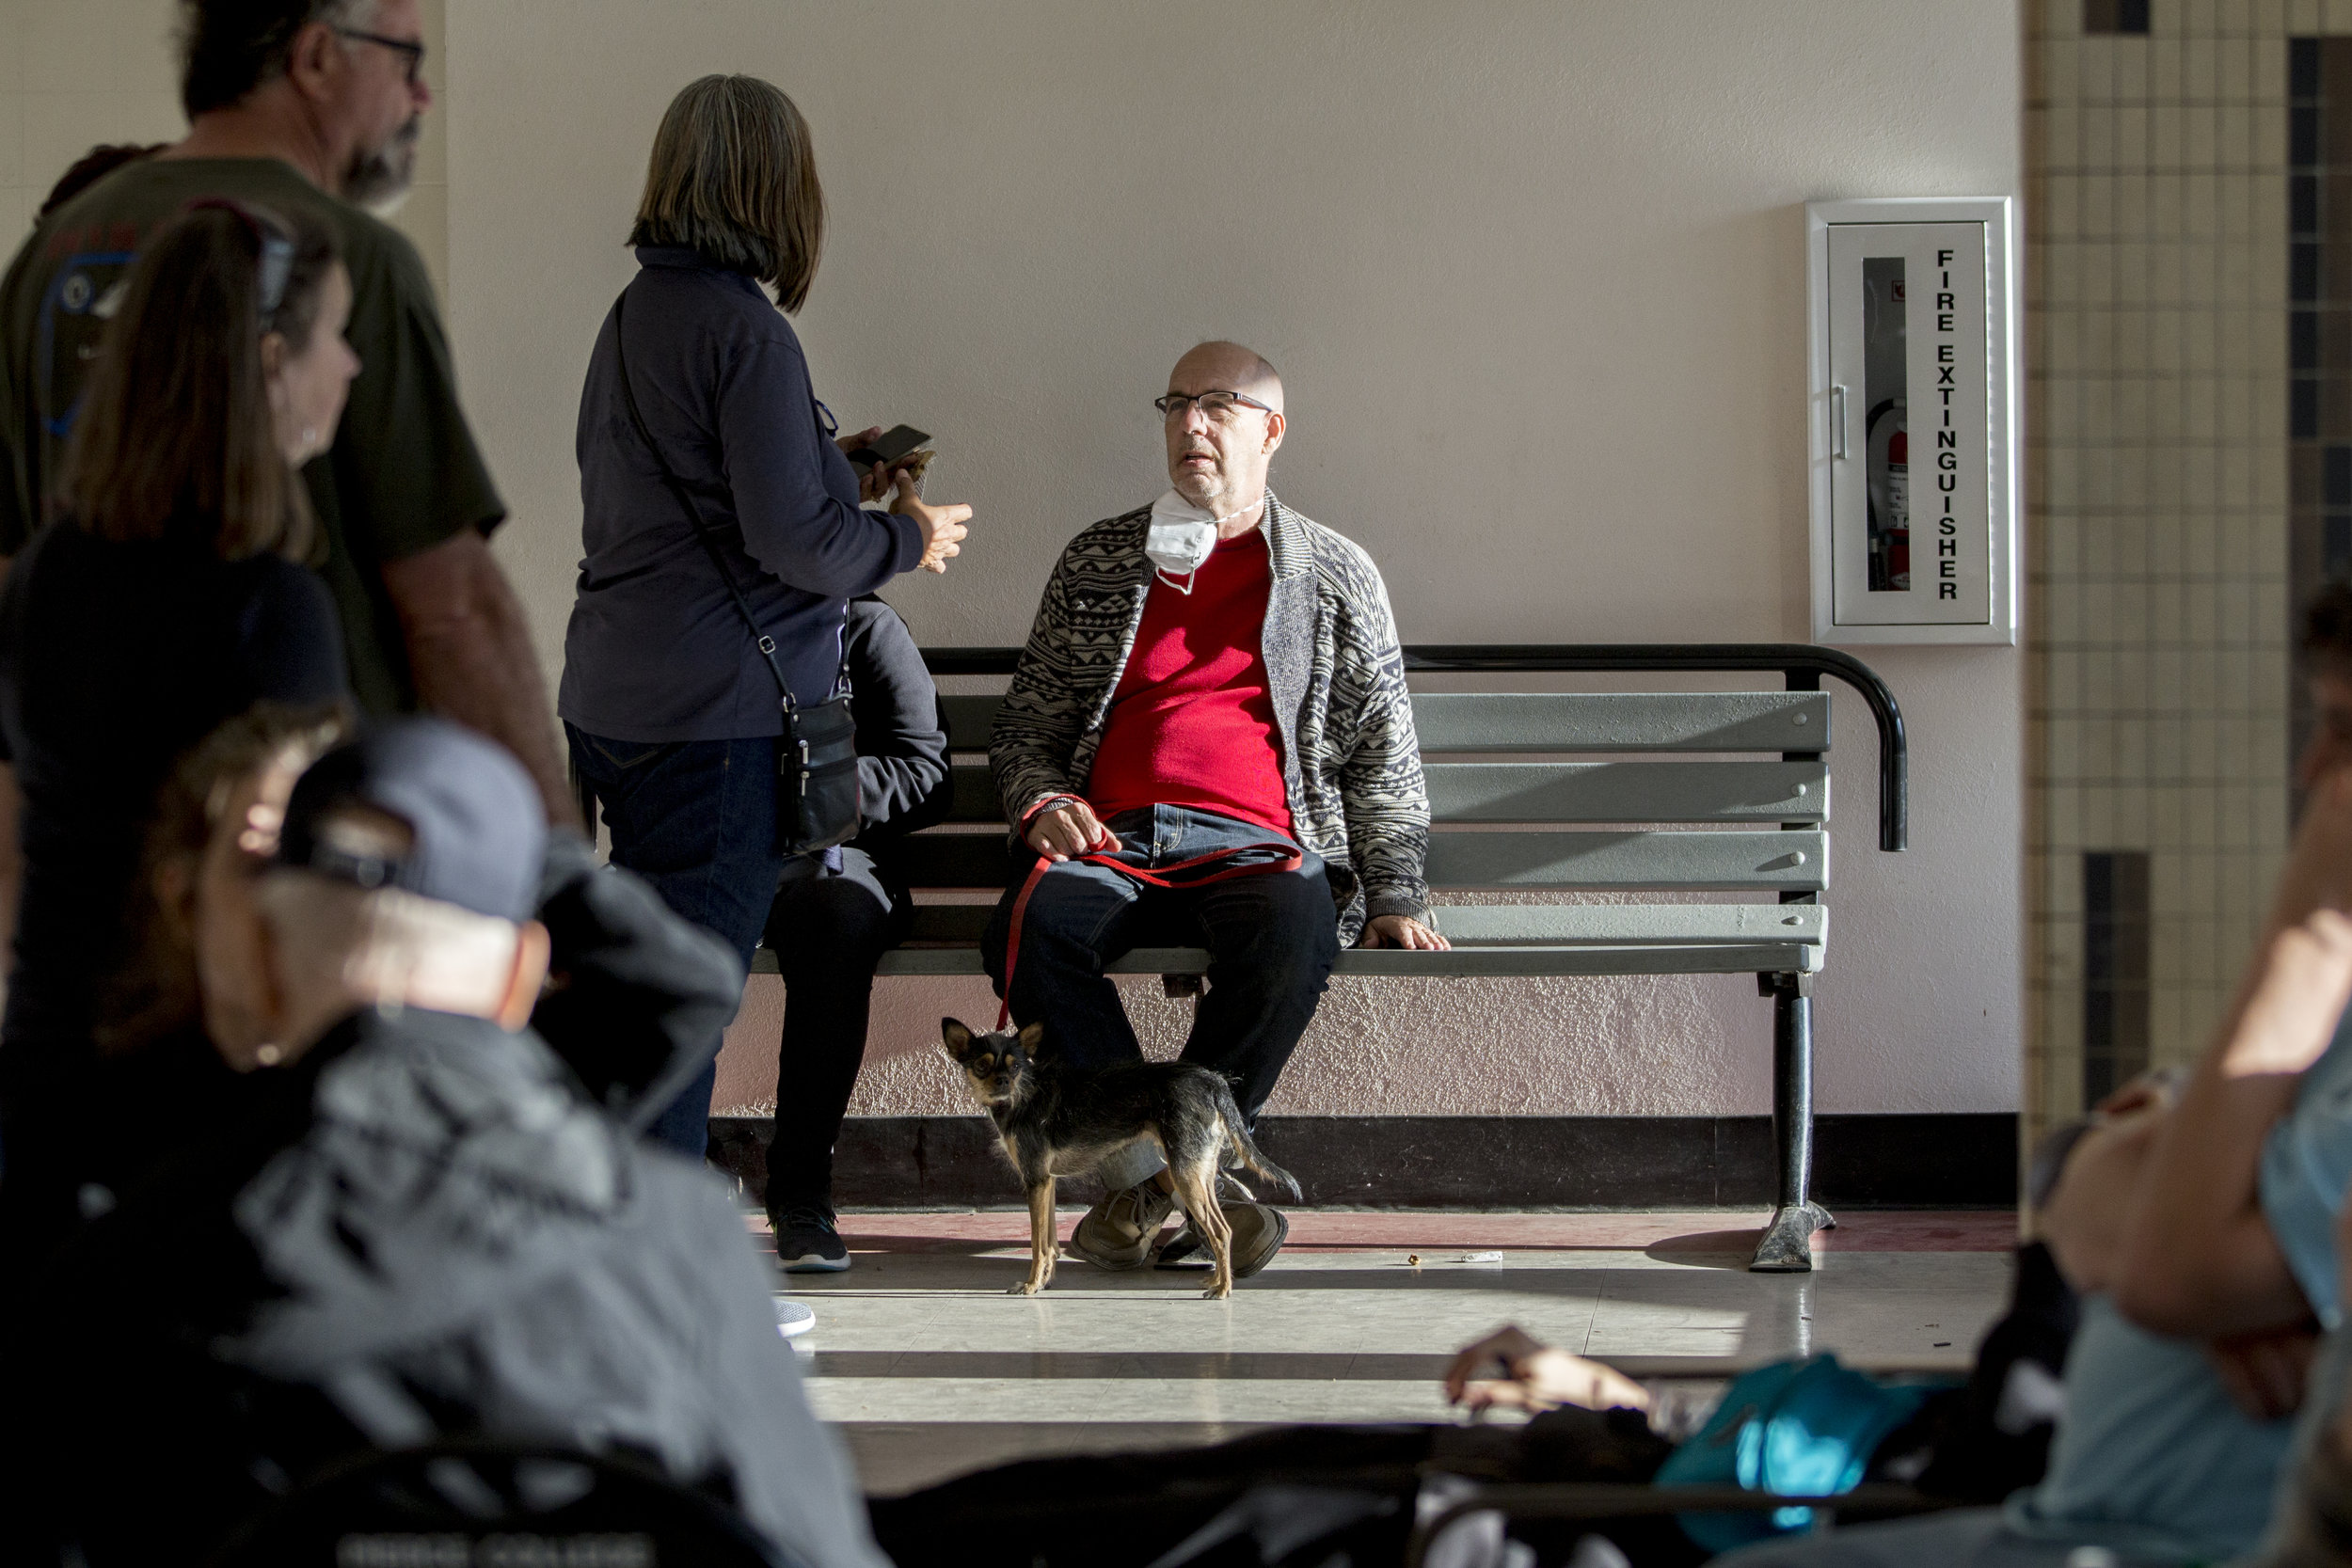  Scott Geske (center), from Oak Park, sits with his family and dog, Jasper, at the Woolsey fire evacuation center set up at Los Angeles Pierce College on November 9, 2018 in Woodland Hills, Calif. 

Geske reflected on how they moved into the neighbor